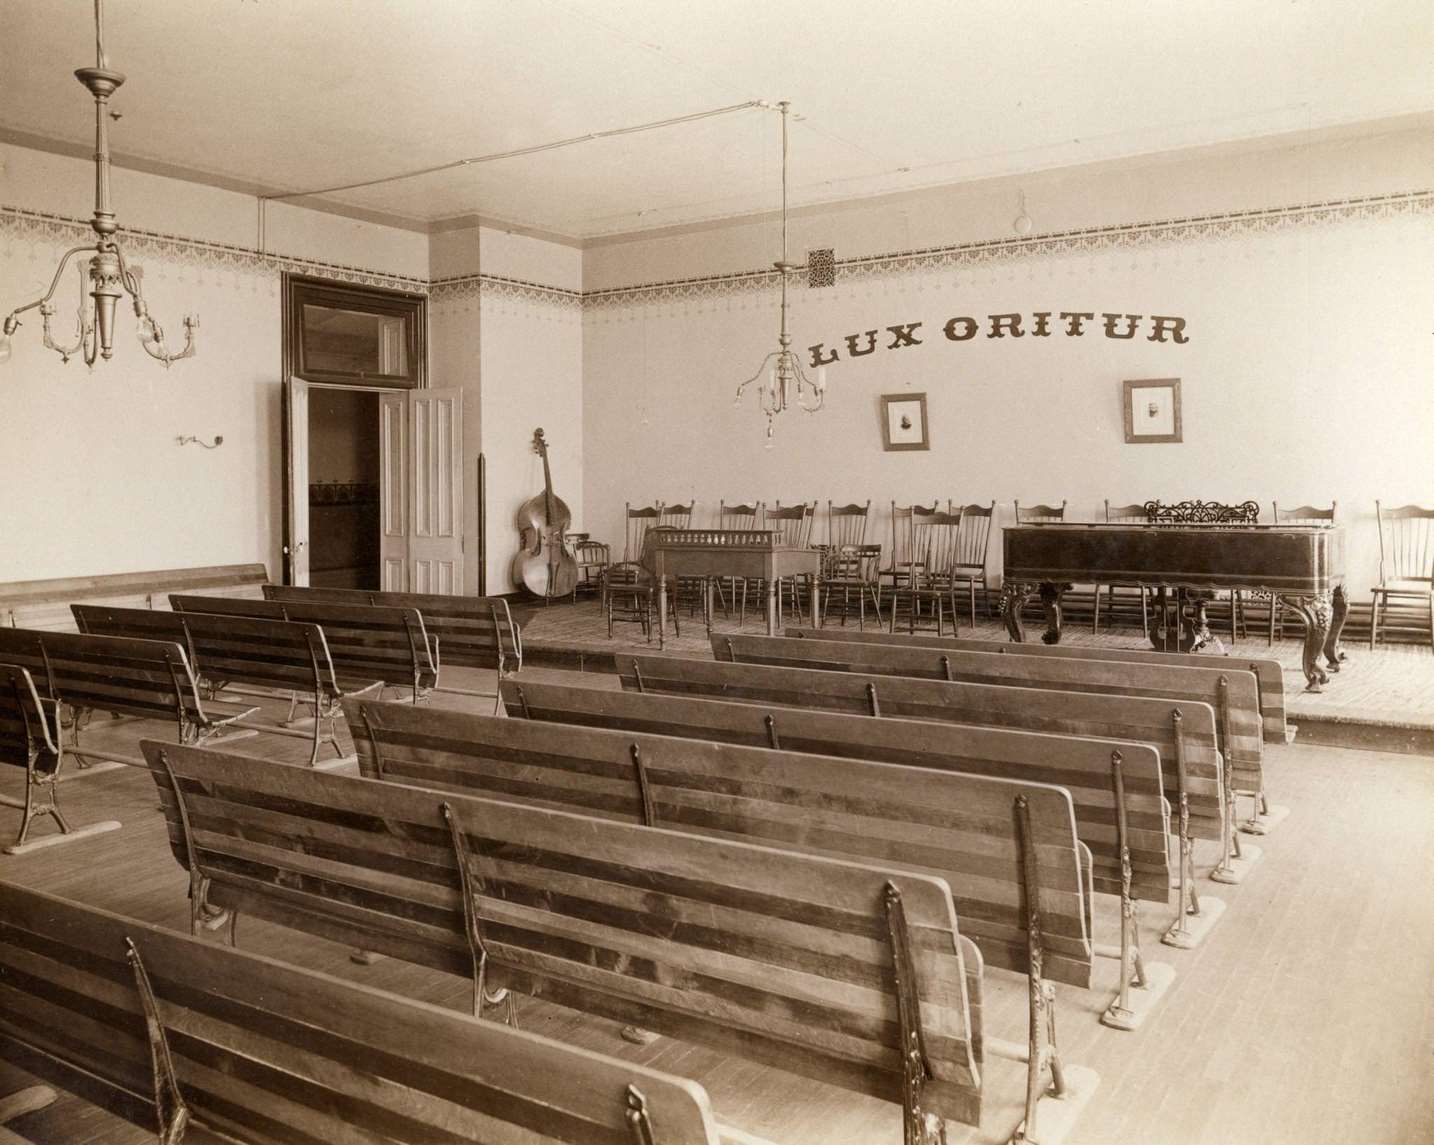 Music recital room at the State School for the Blind with seven rows of seating, a piano and cello, Janesville, Wisconsin, 1893.